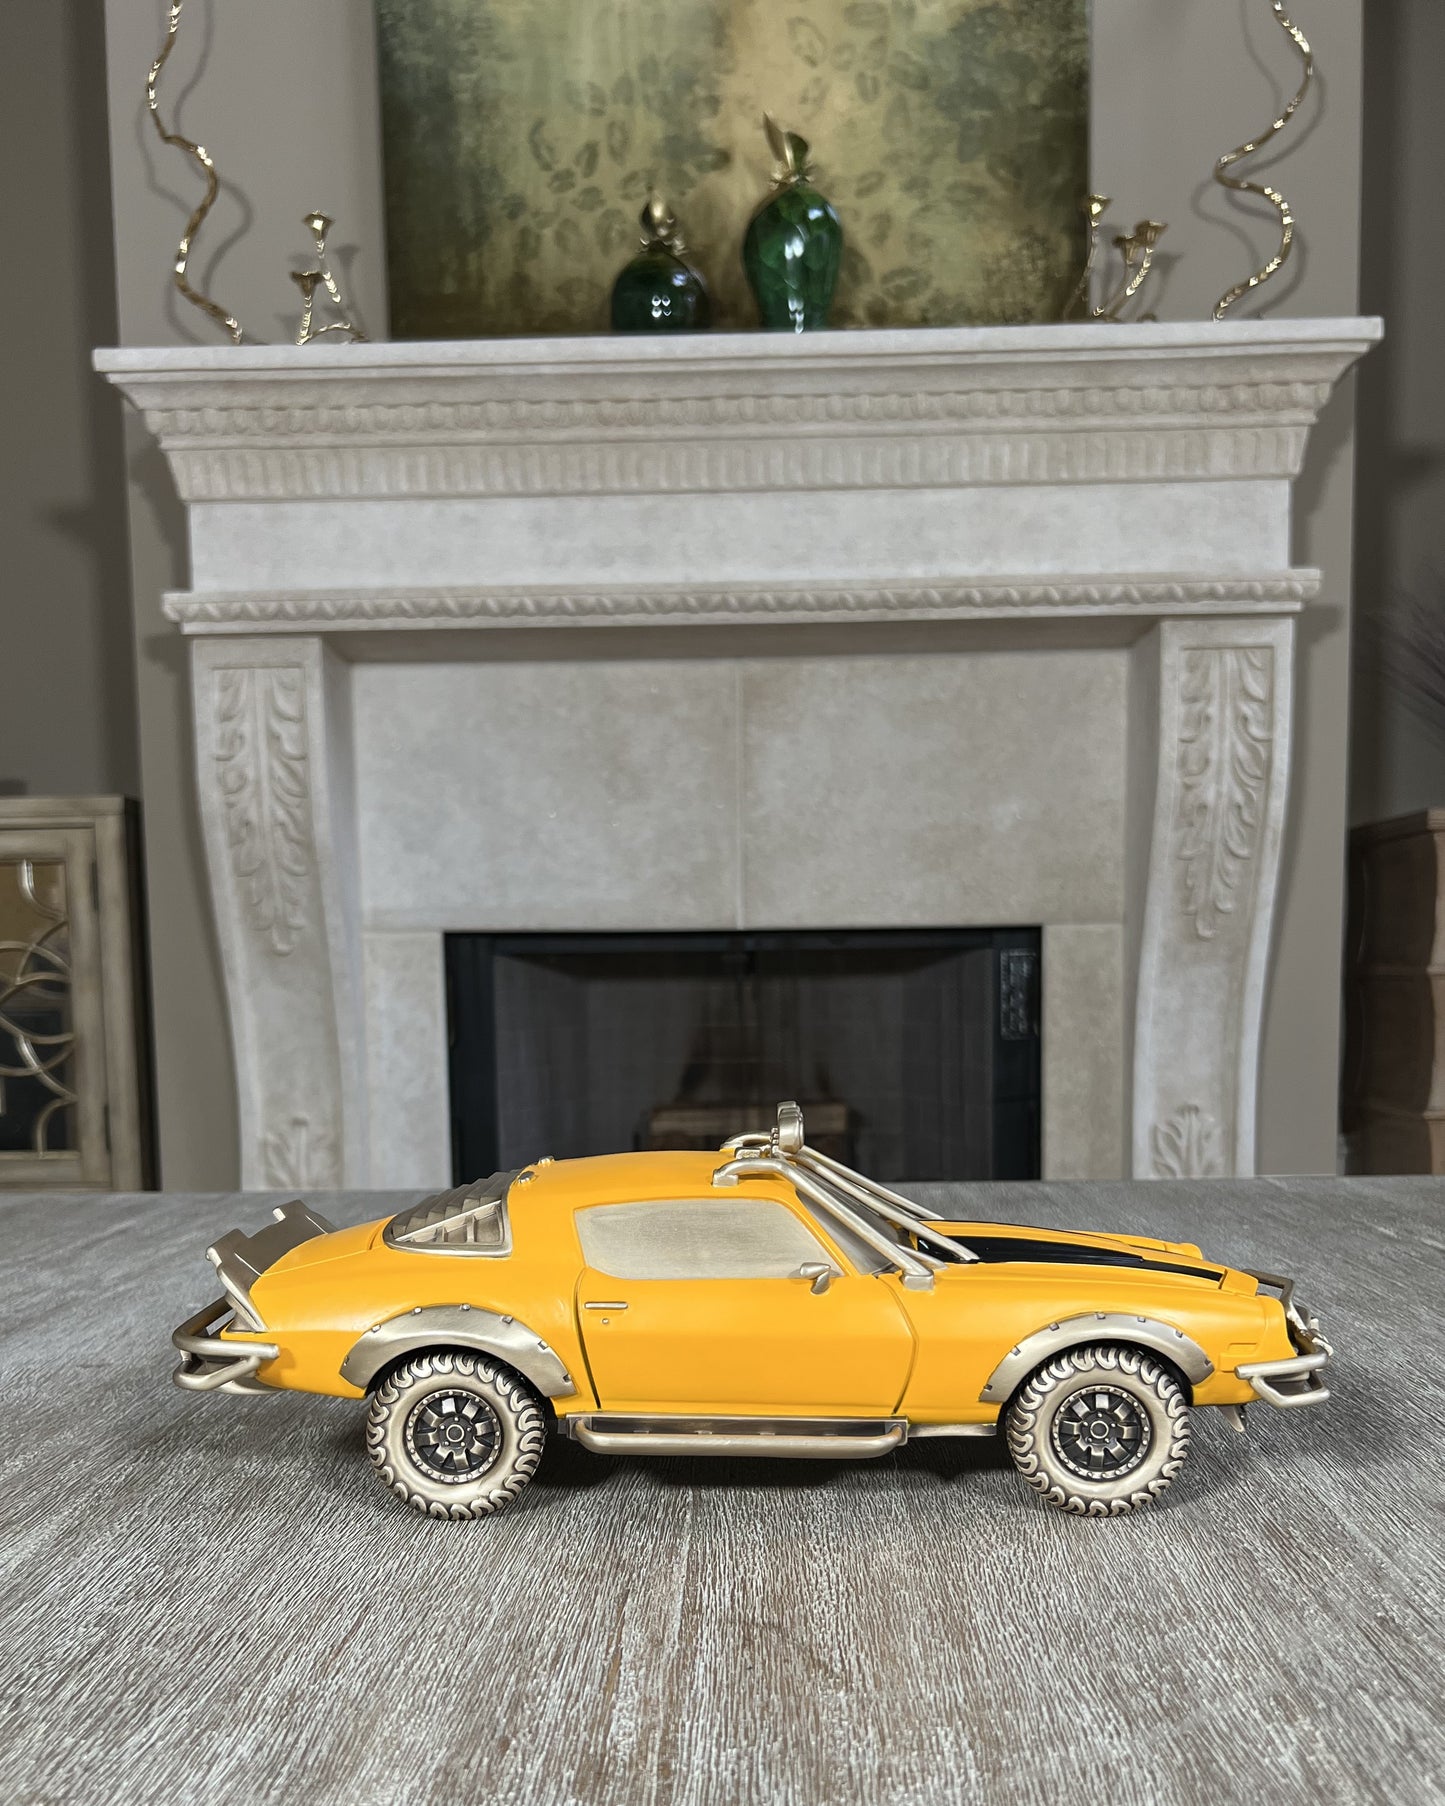 Transformers statues Sculpture: Bumblebee (Car Version) Classic Collectible, High end Toy, Home Decor, Colored brass Sculpture